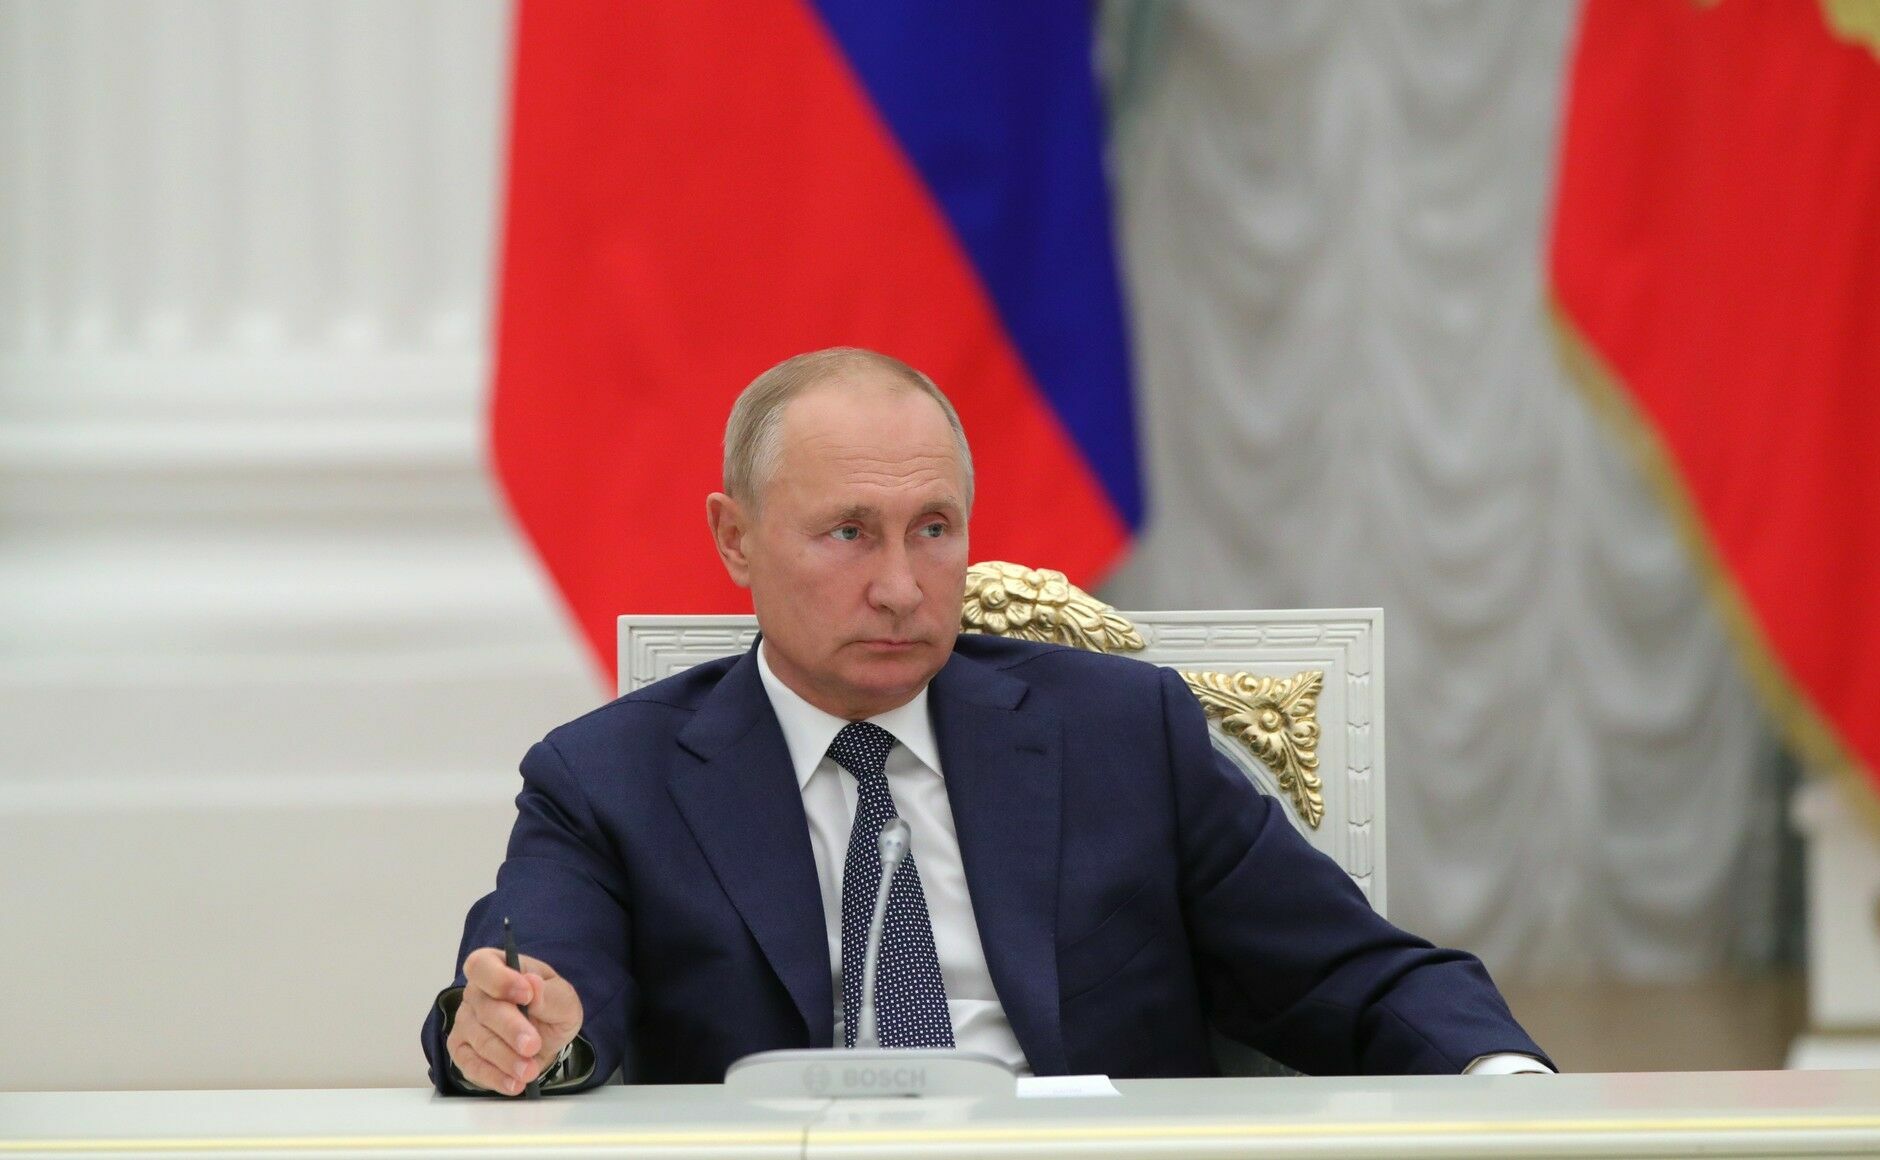 Putin criticized government over rising food prices